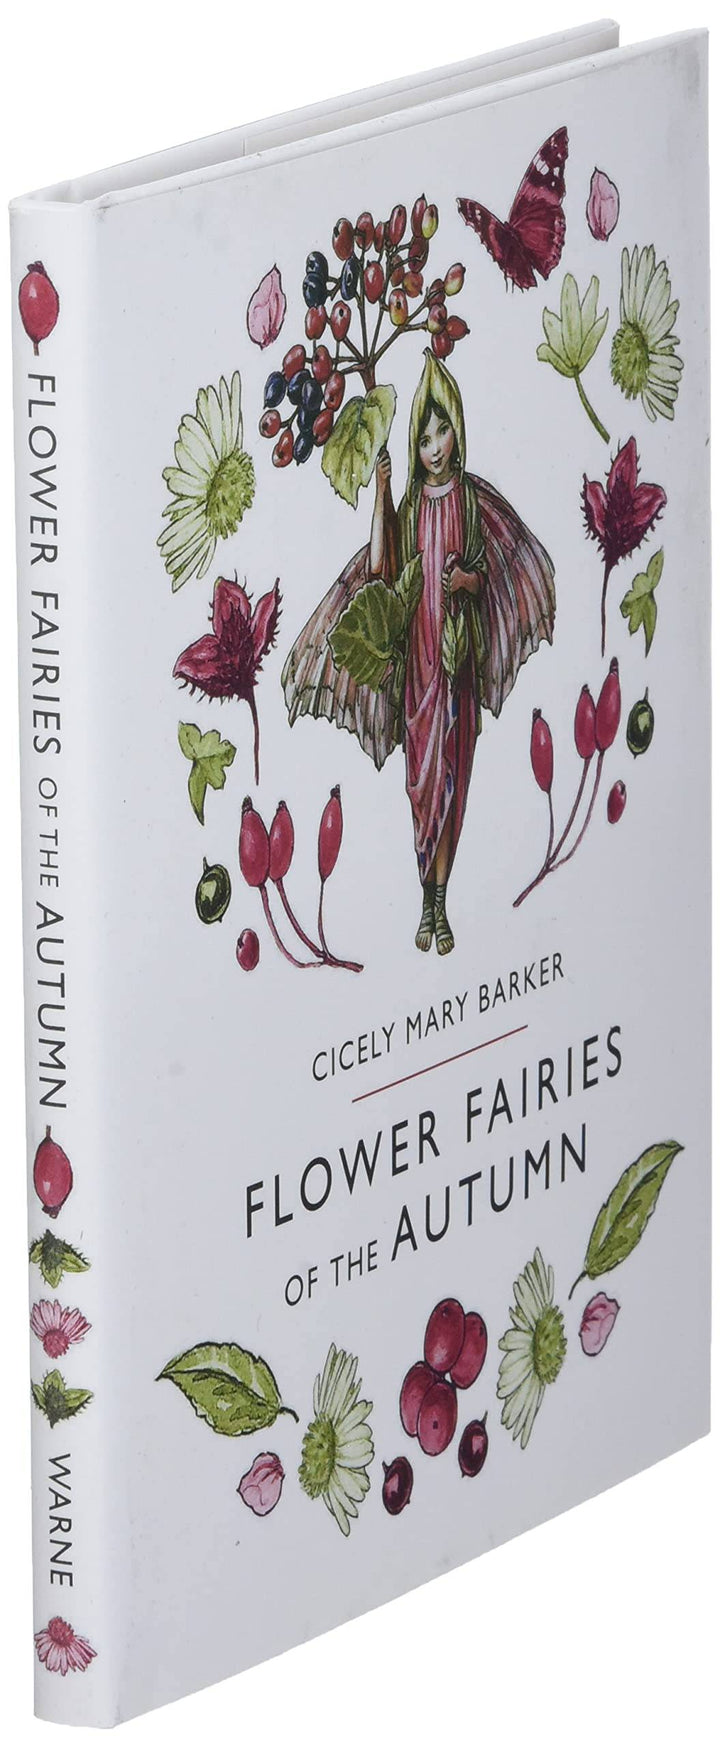 Flower Fairies of the Autumn by Cicely Mary Barker (view of binding)